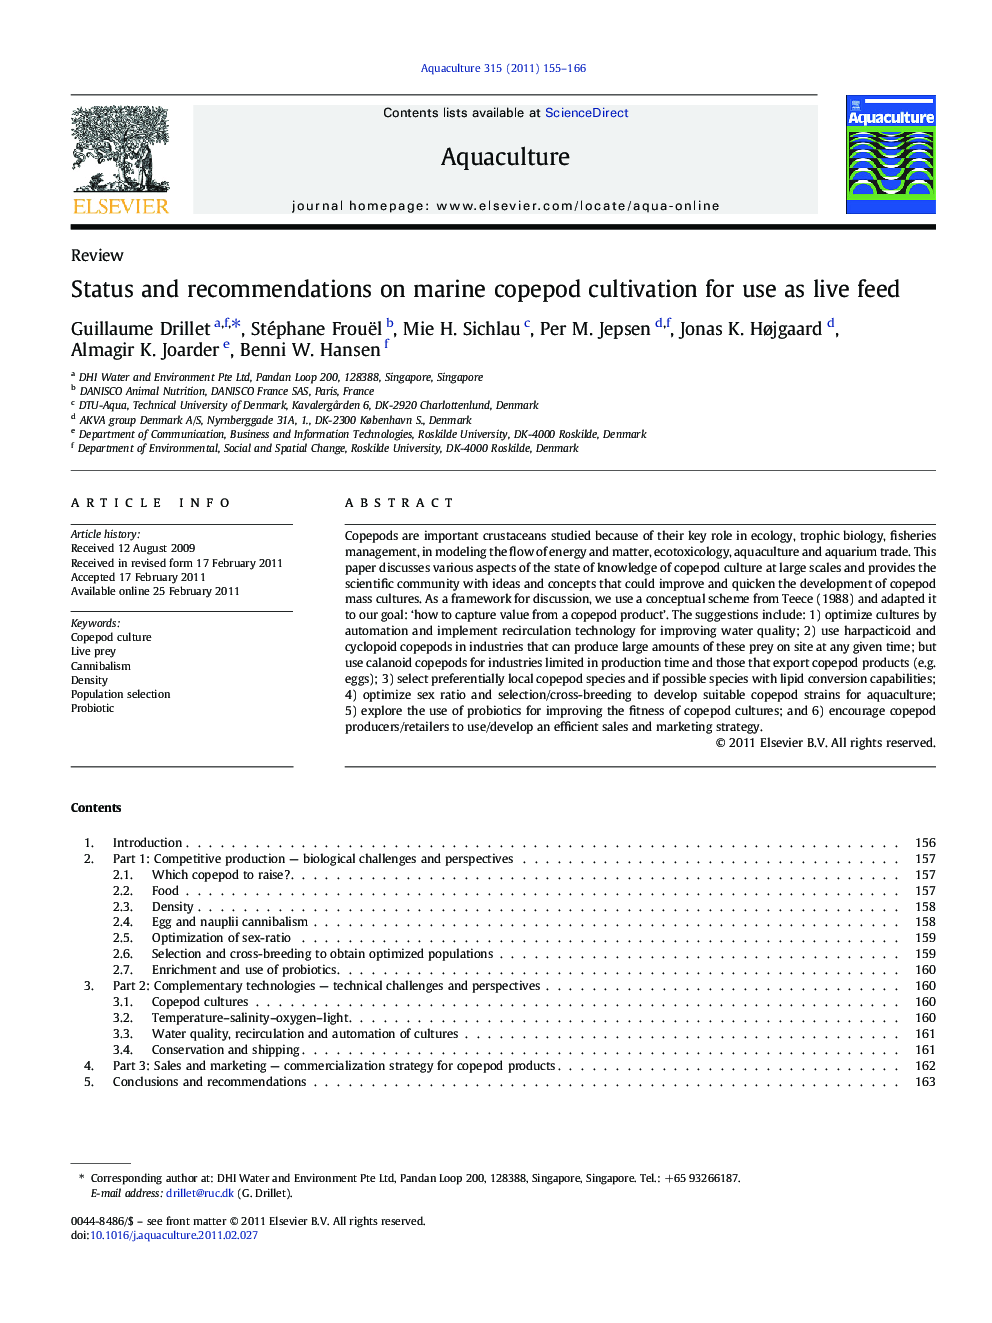 Status and recommendations on marine copepod cultivation for use as live feed